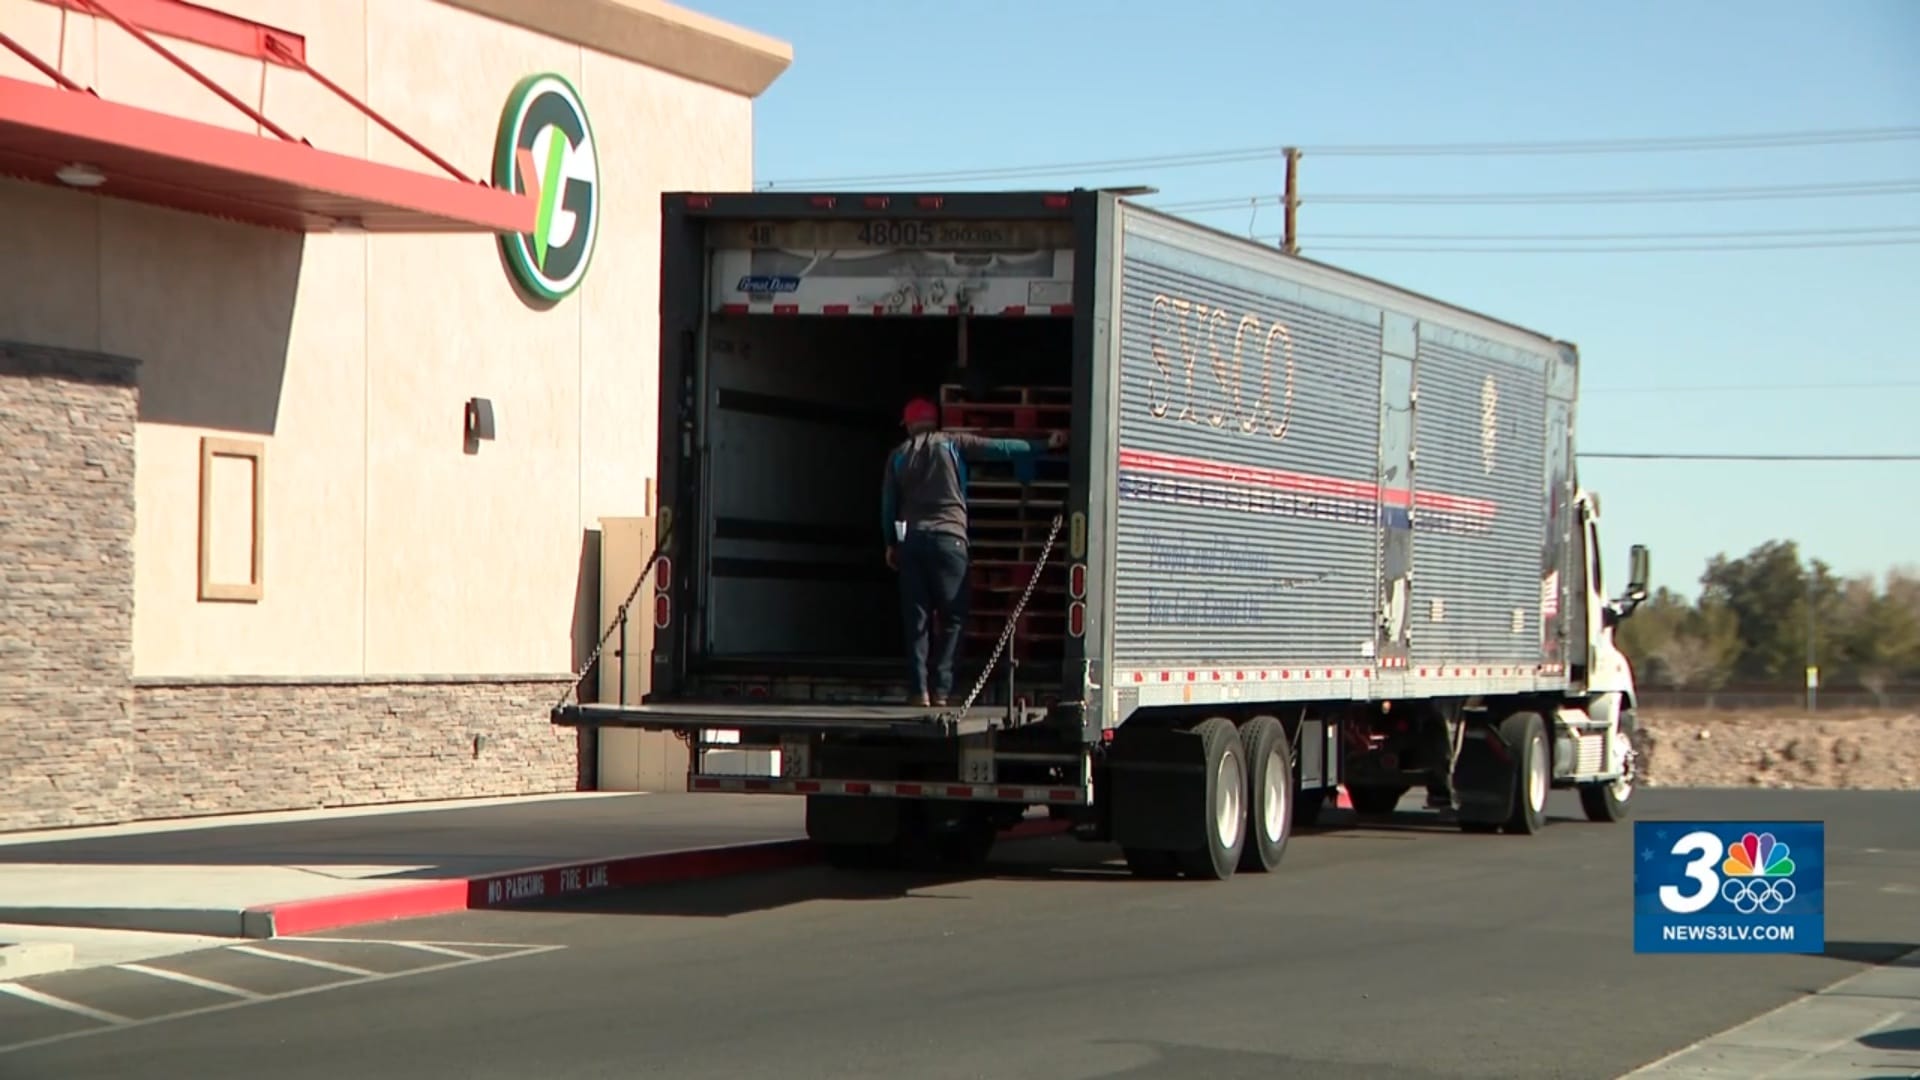 A truck delivering goods for a Green Valley Grocery